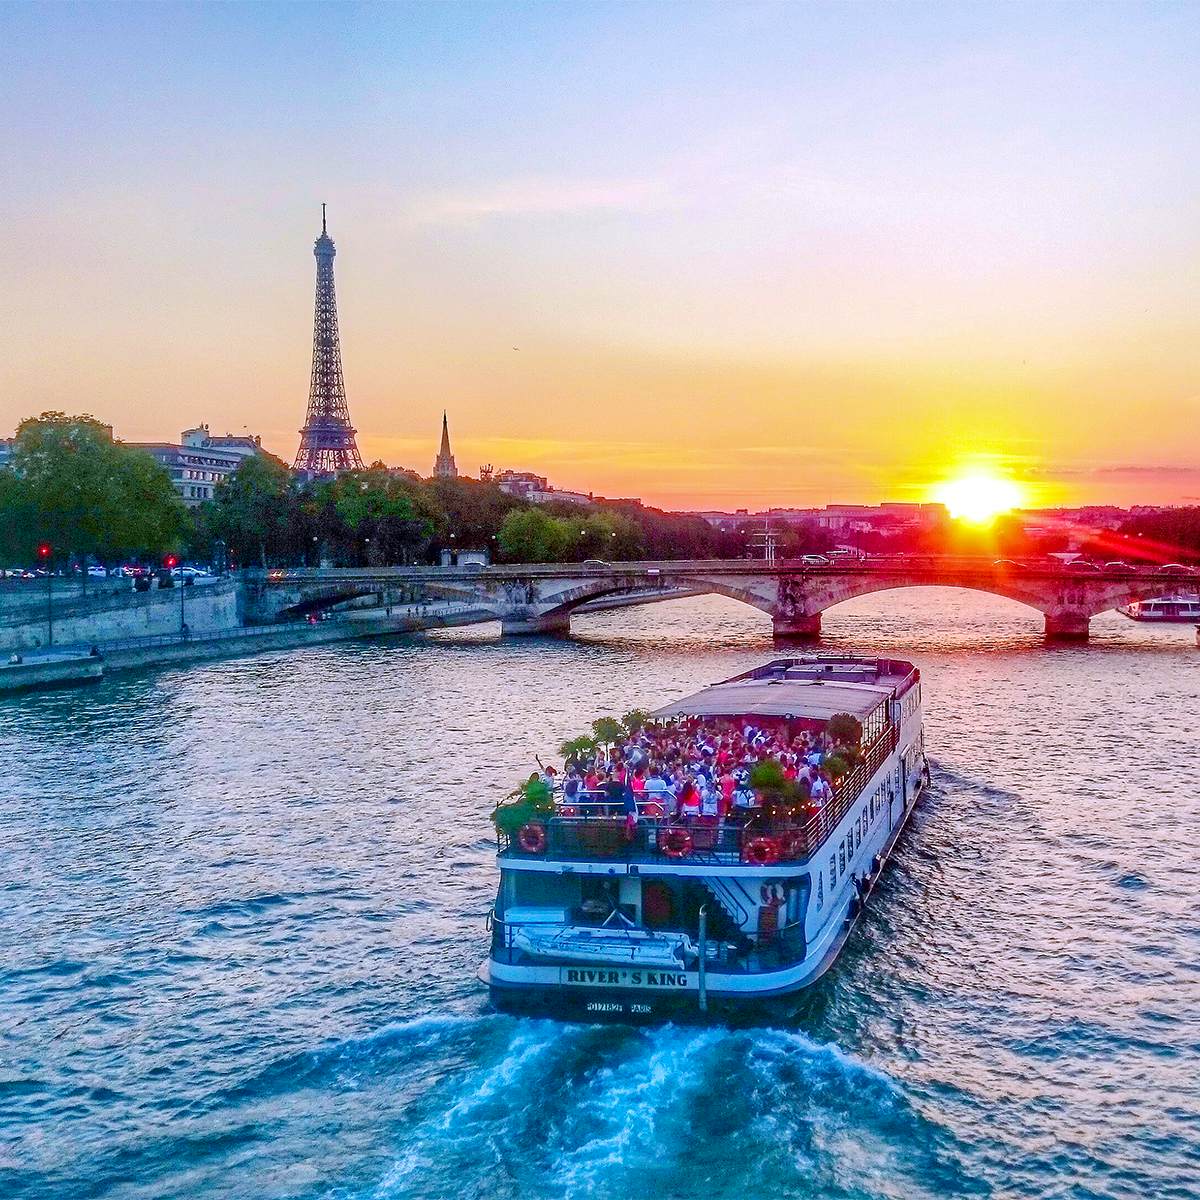 Evening City Tour, Seine Cruise and Eiffel Tower (2nd Floor or Summit) with Priority Access